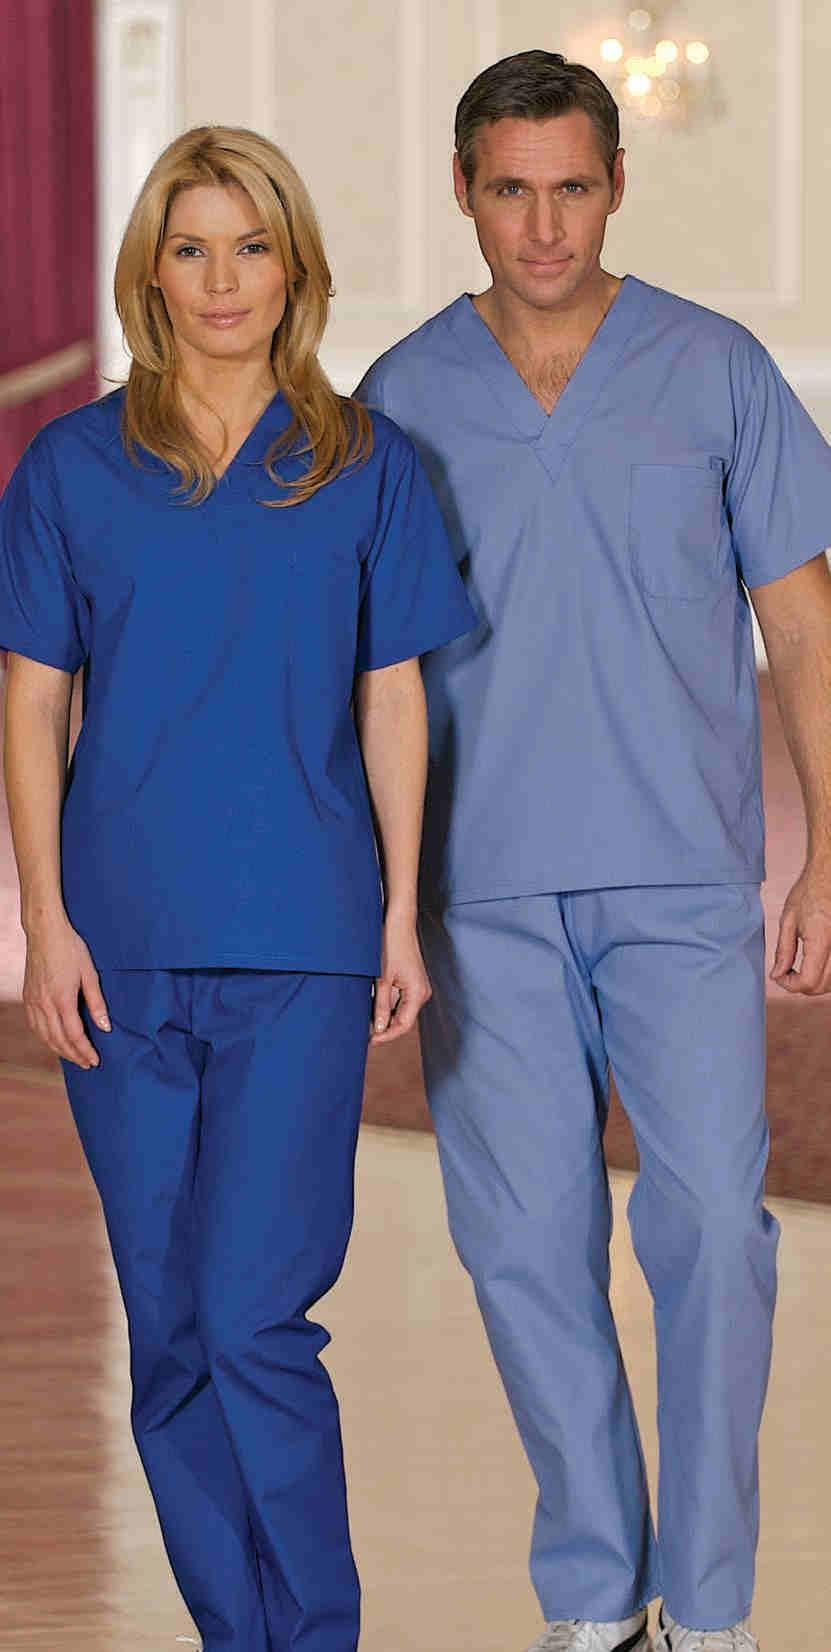 HEALTH CARE WEAR v-neck scrub Top Lightweight and breathable, it s an essential for almost every health care professional.